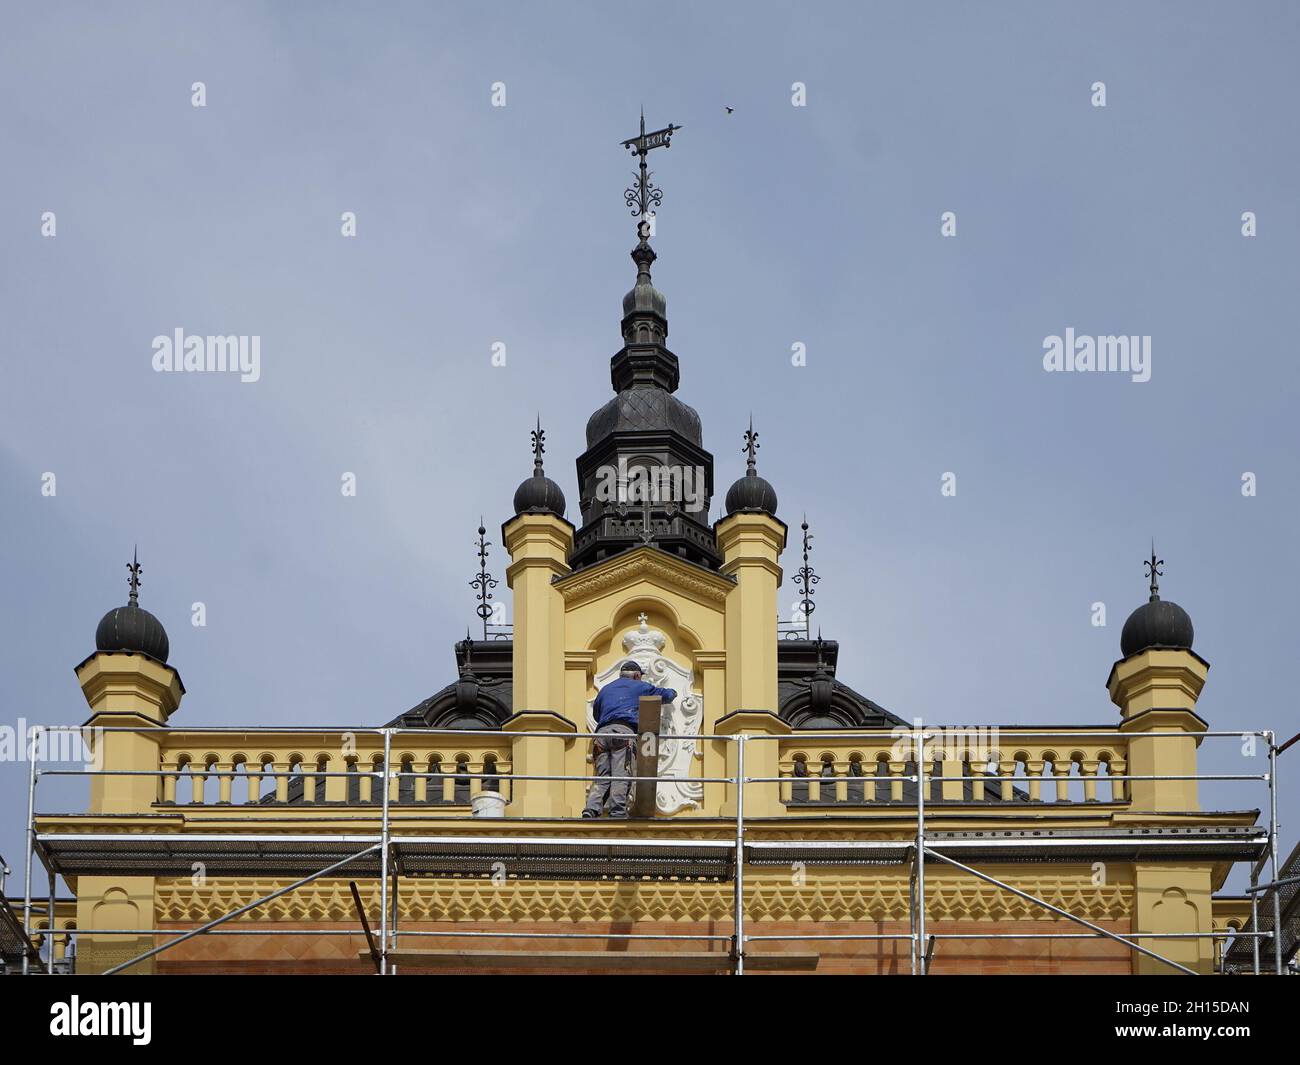 NOVI SAD, SERBIA - Mar 09, 2021: A Beautiful view of Bishop's palace during Restauration, with a worker on the scaffolding in Novi Sad, Serbia Stock Photo